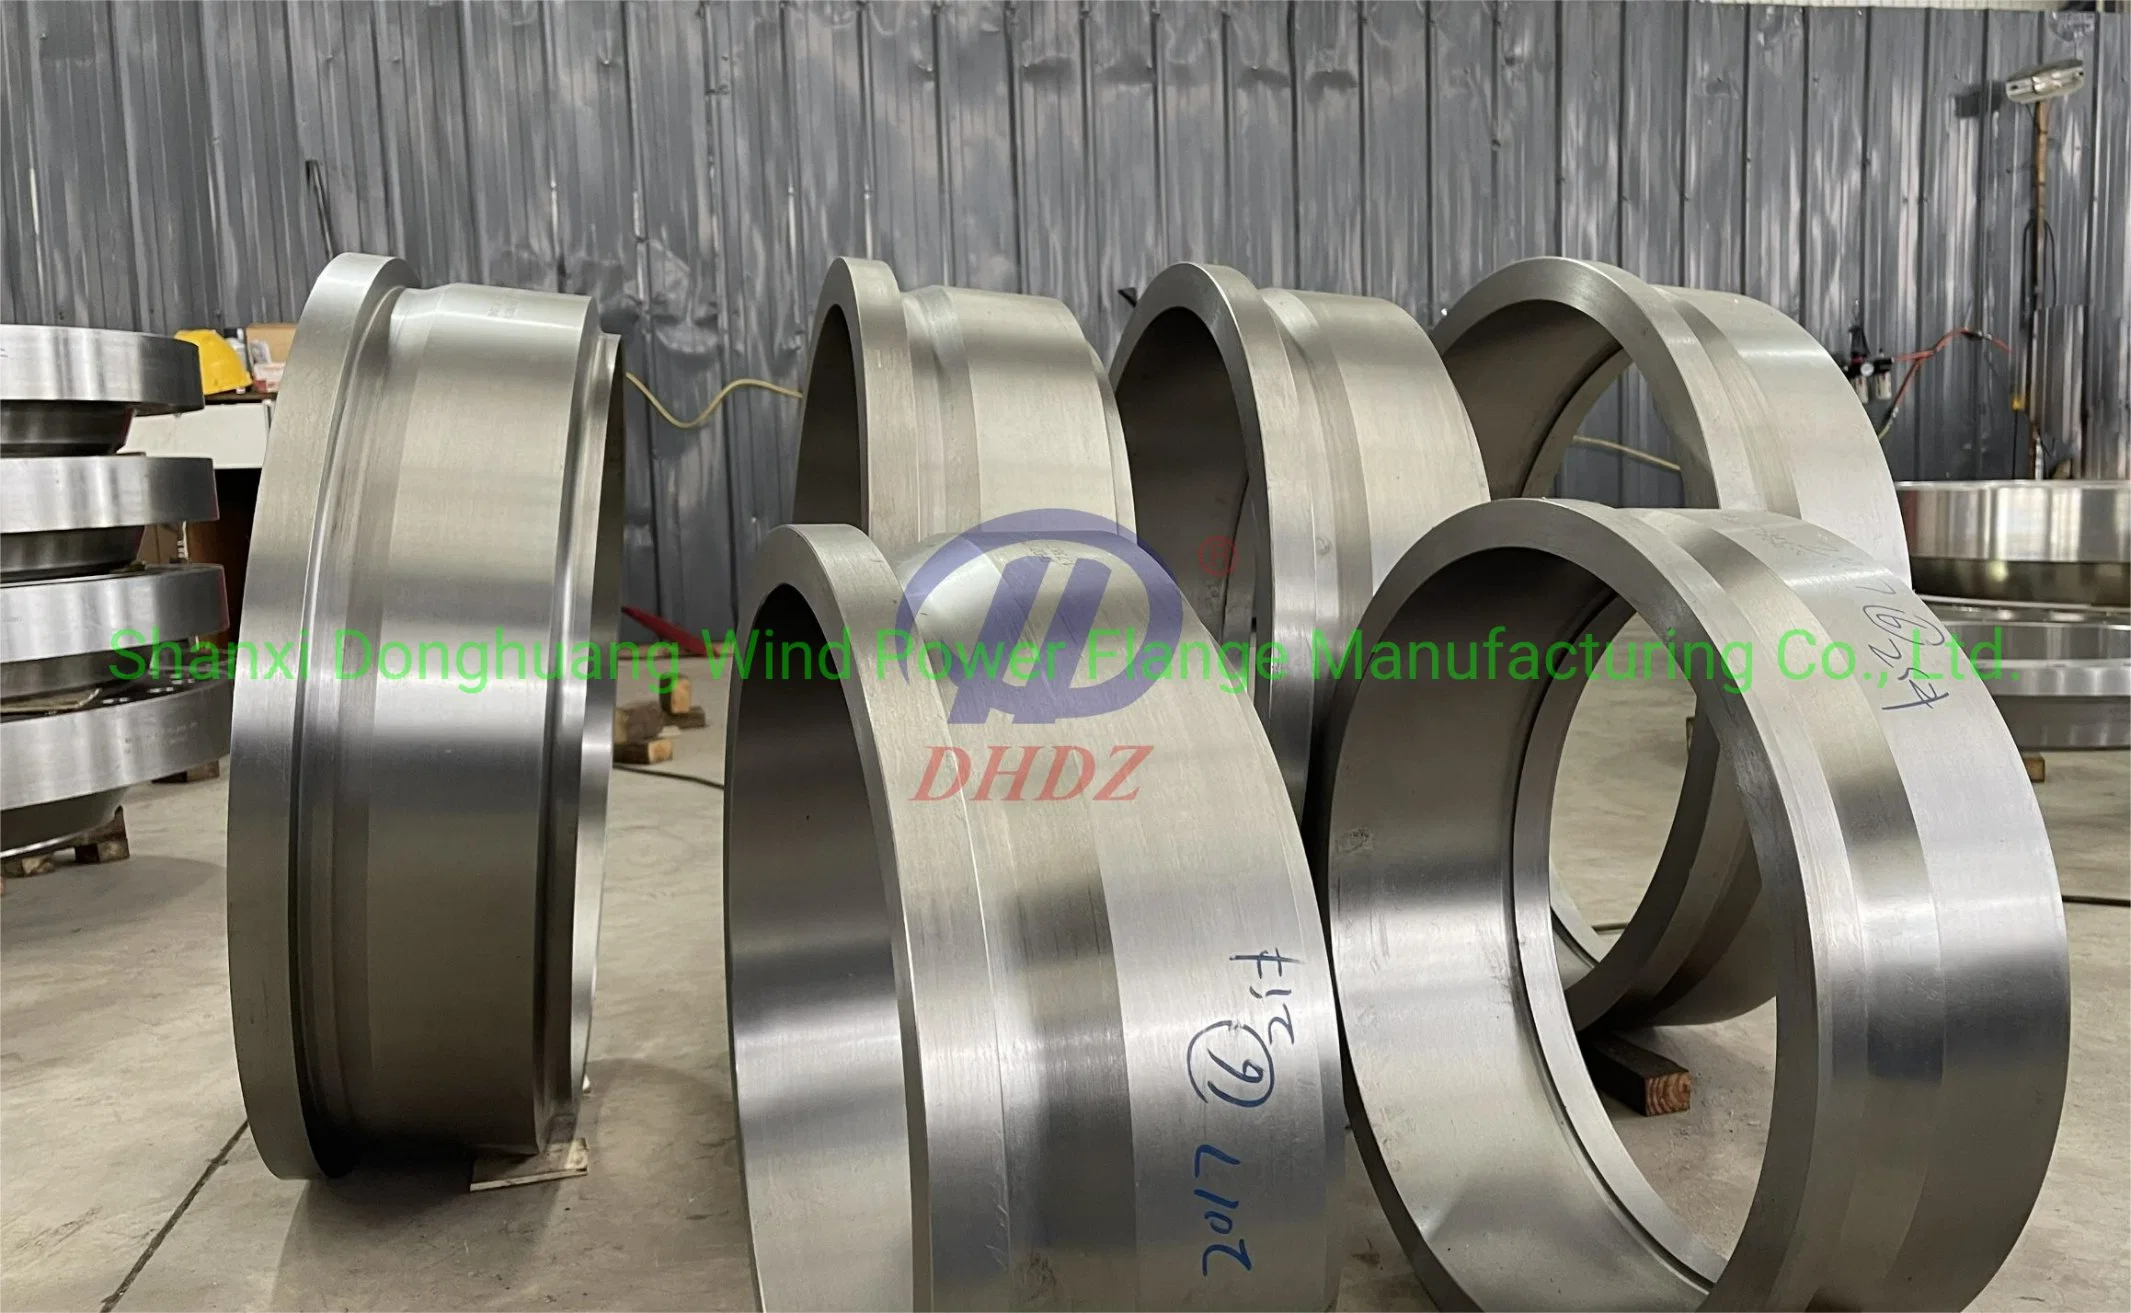 AISI 4130 Alloy Steel Uns G41300 SAE 4130 25crmo4 1.7218 708A25 Scm430 Proof Machined Casing Wellhead Parts Rig Parts